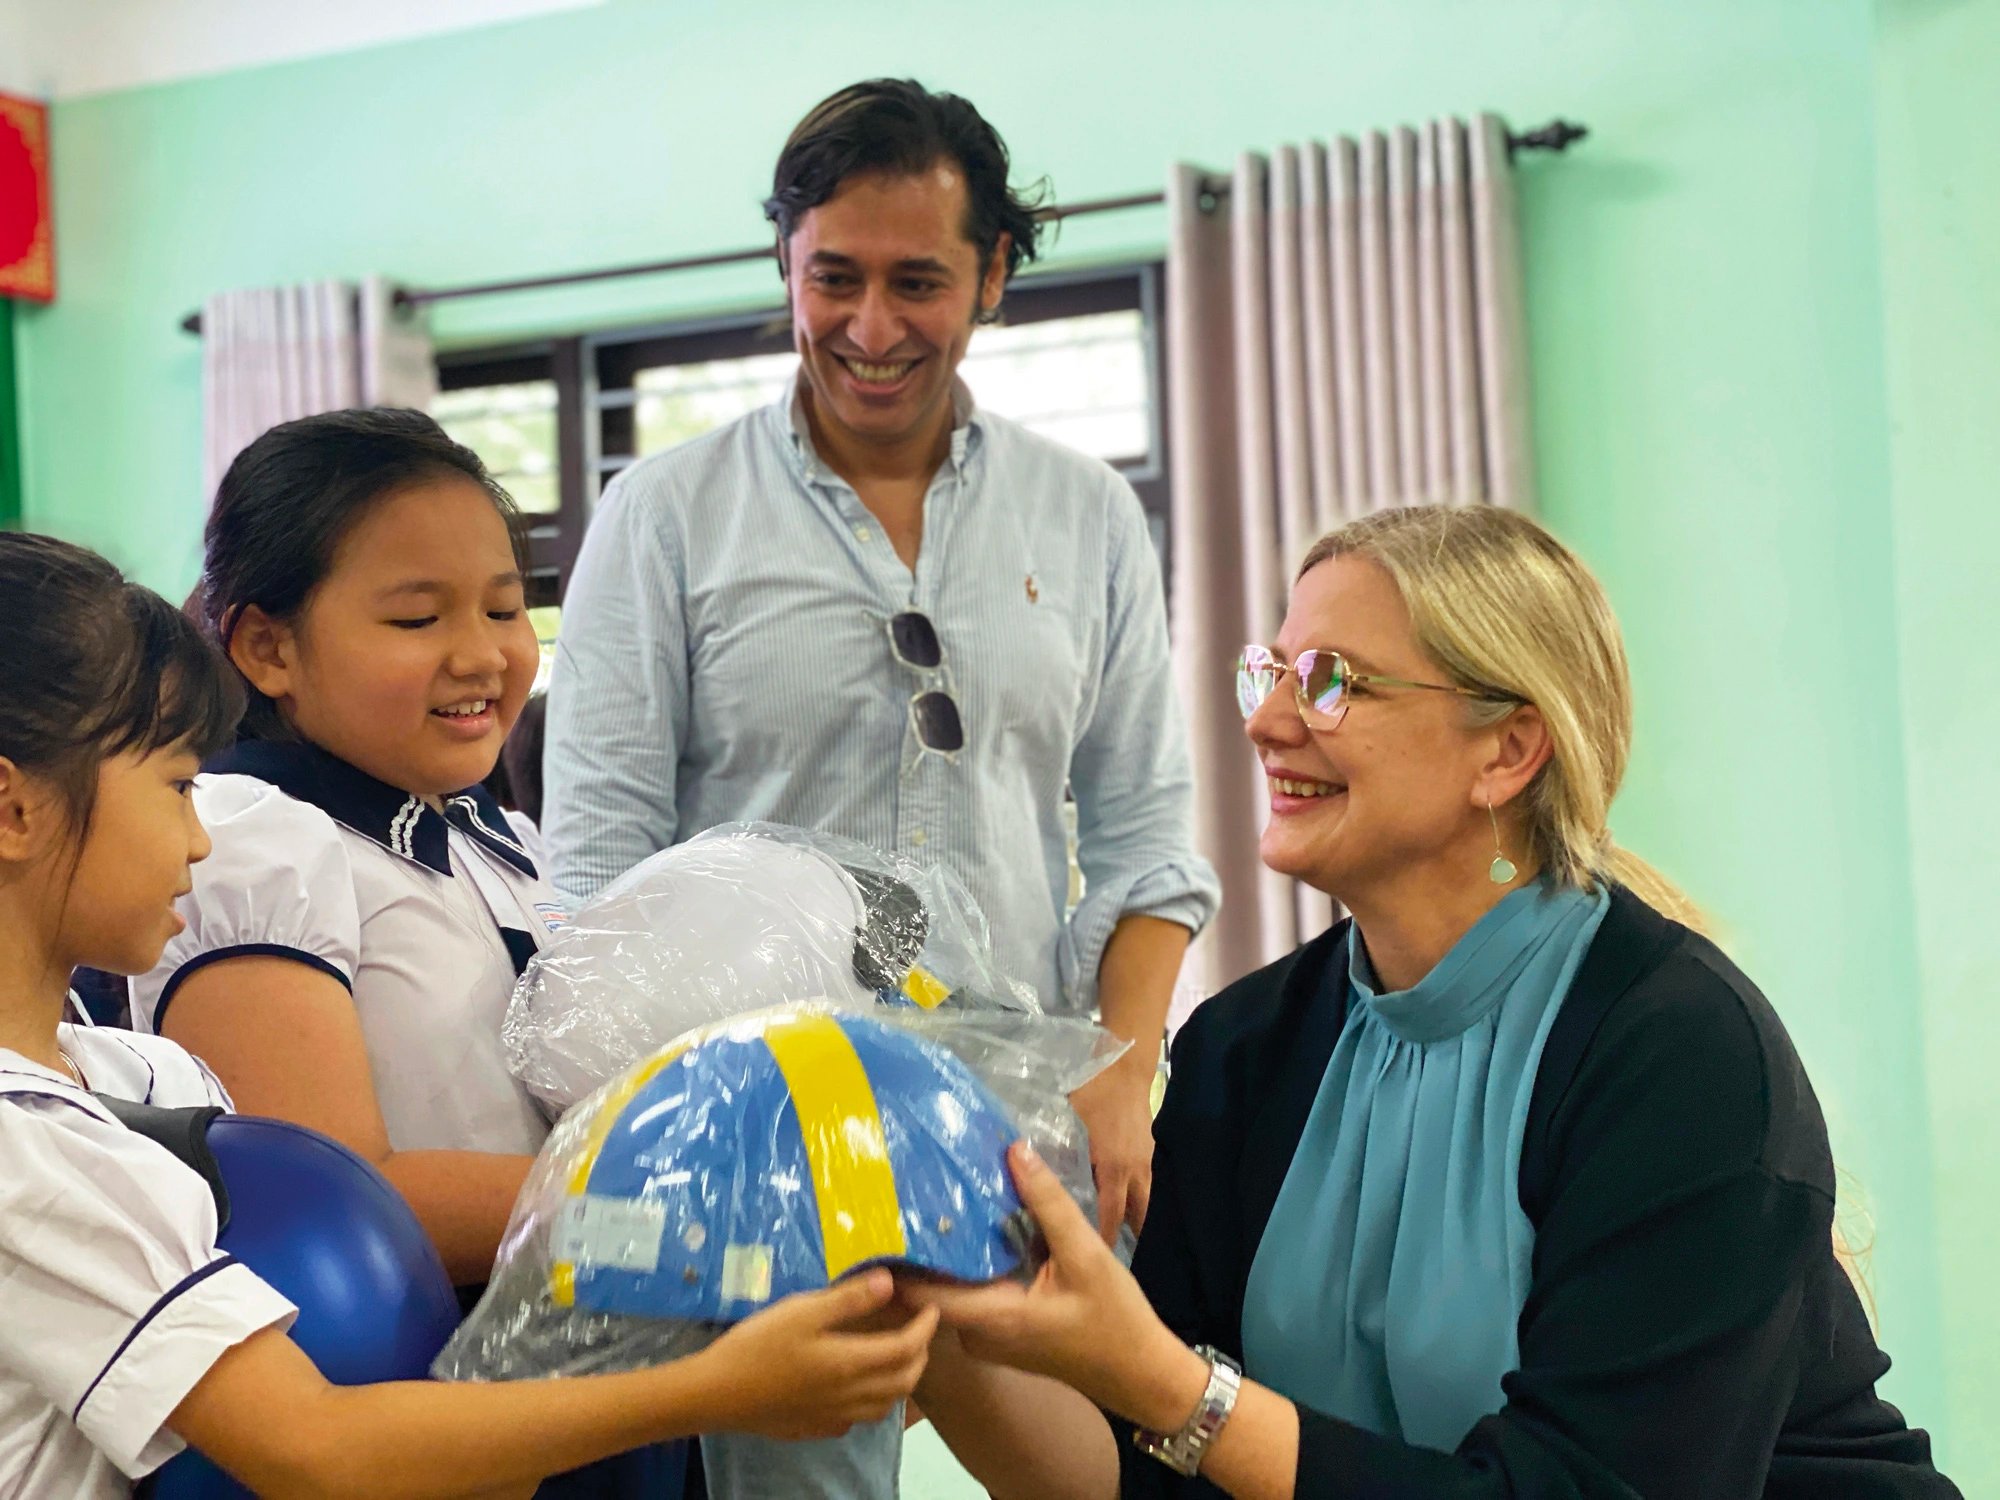 Swedish Ambassador to Vietnam Ann Måwe gifts helmets for children in Hoi An City, Quang Nam Province, central Vietnam in 2023. Photo: B.D / Tuoi Tre